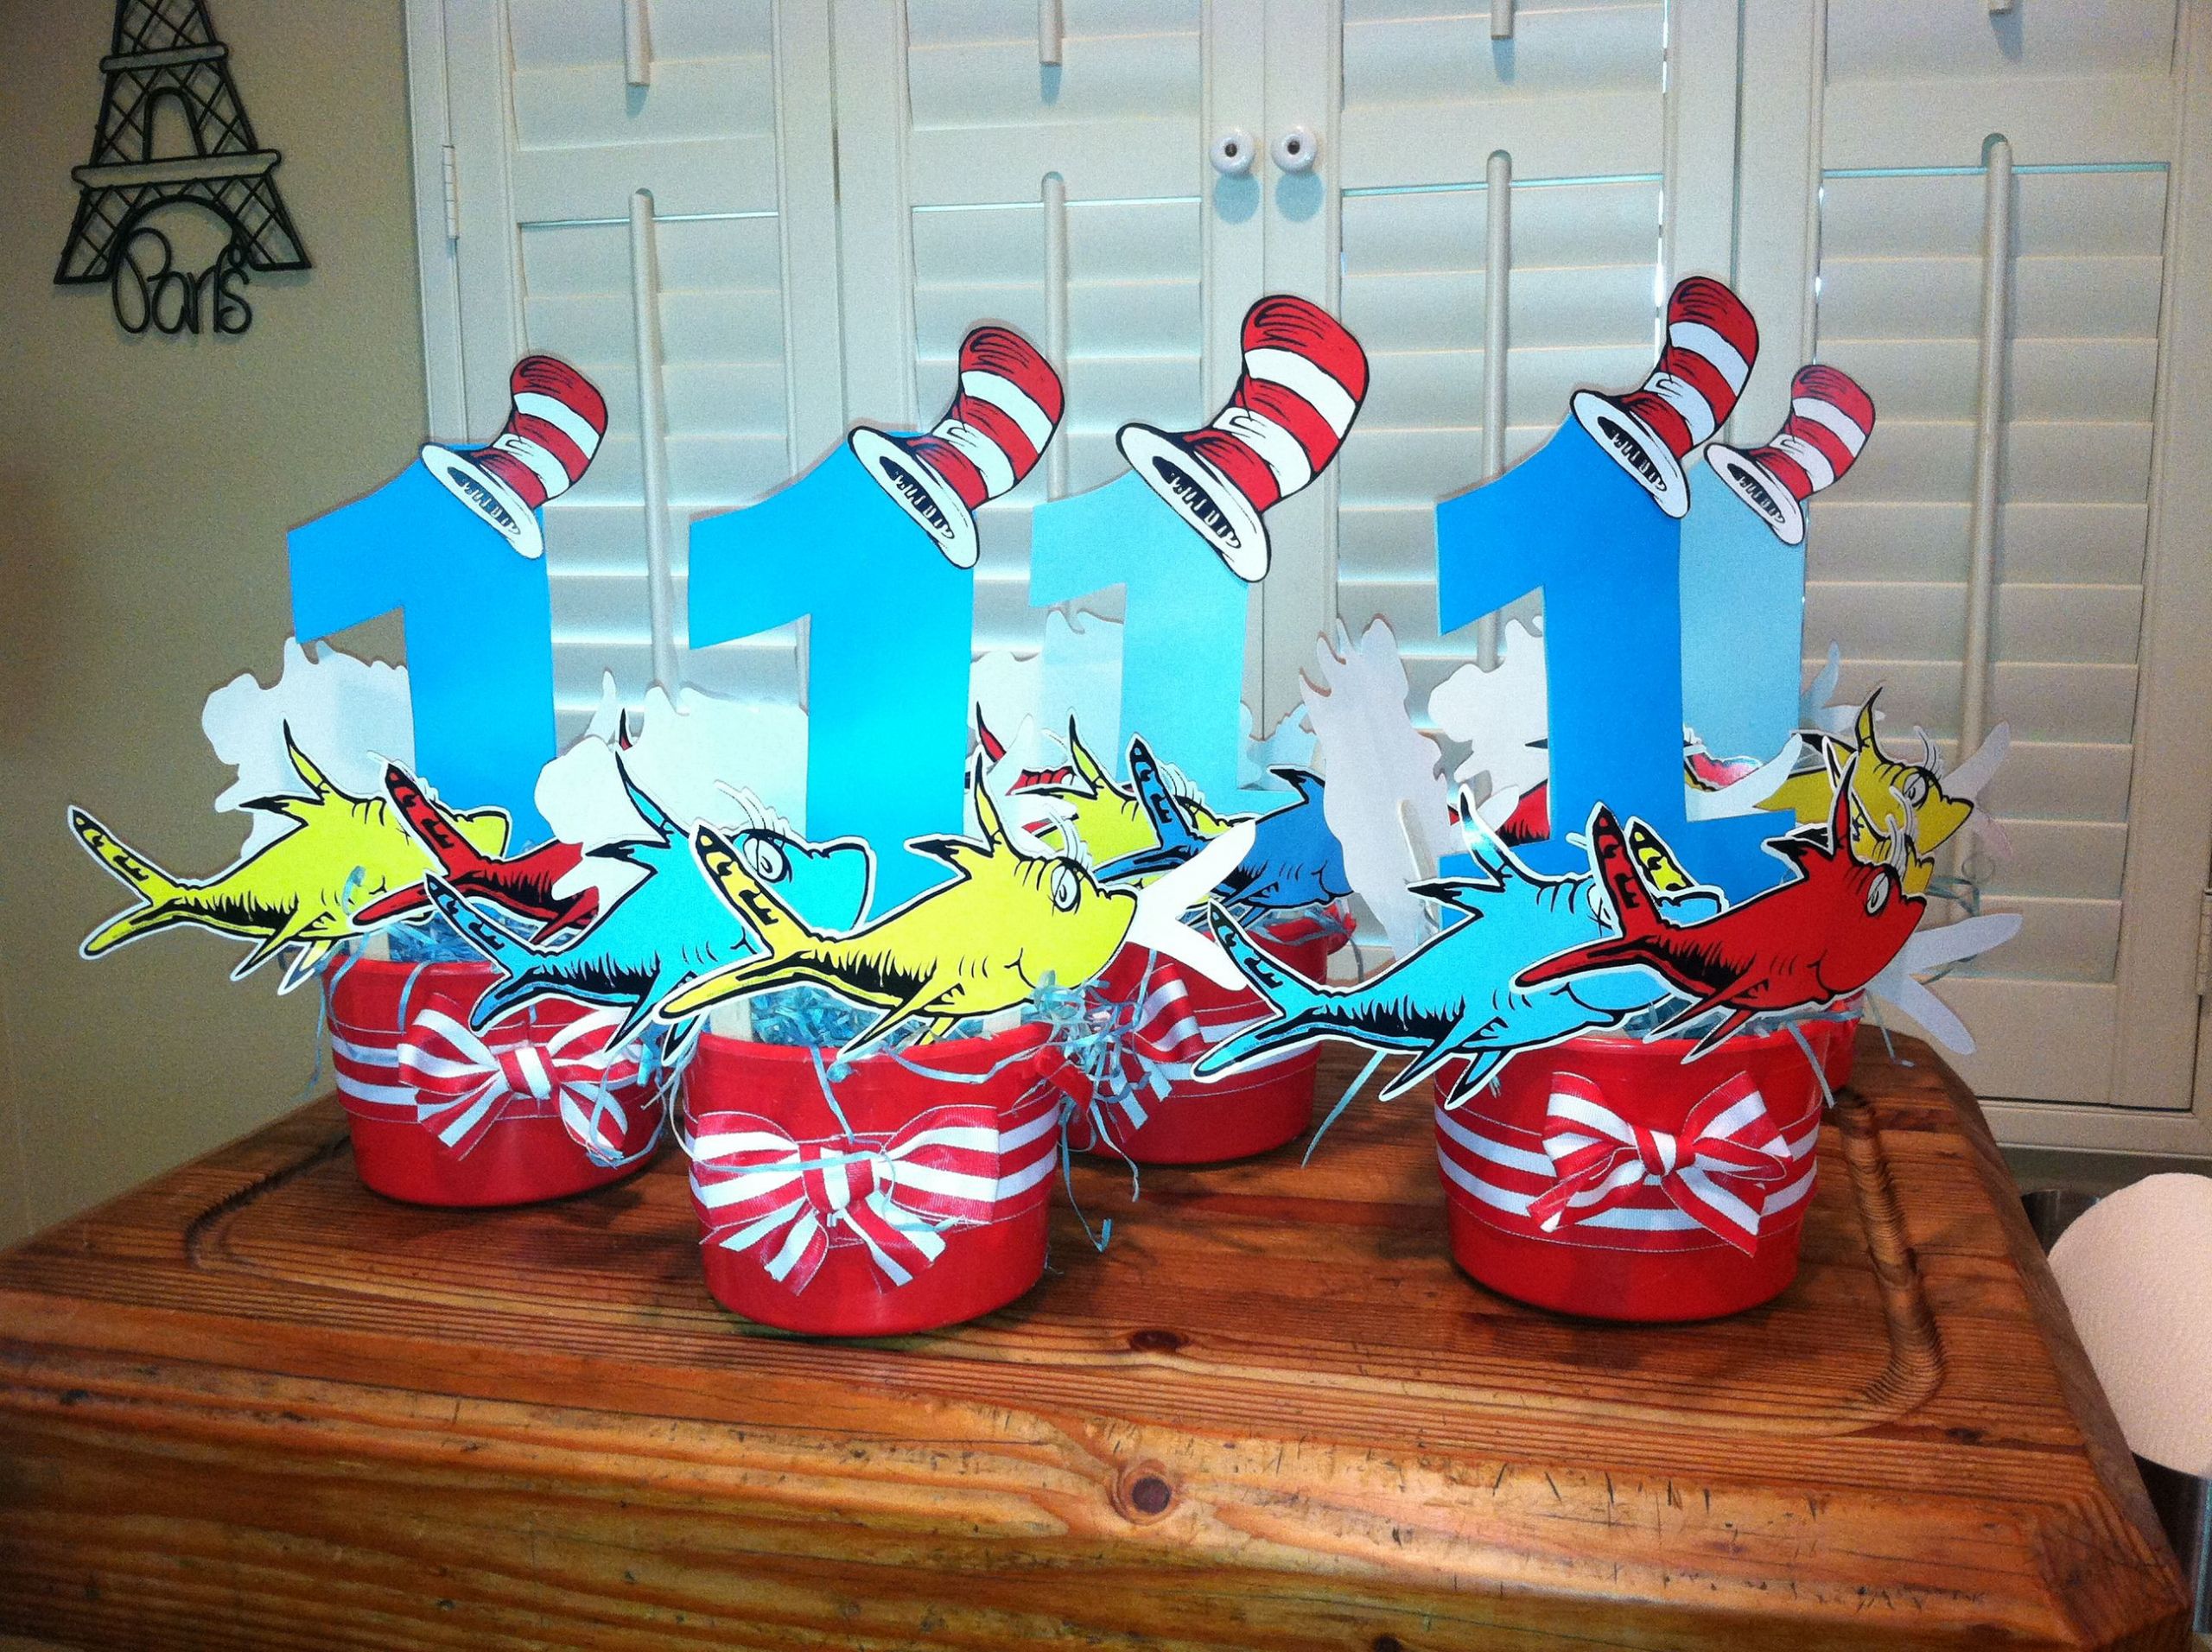 Dr Seuss Birthday Decoration Ideas
 Dr Seuss themed centerpieces 1 cutouts with fish and